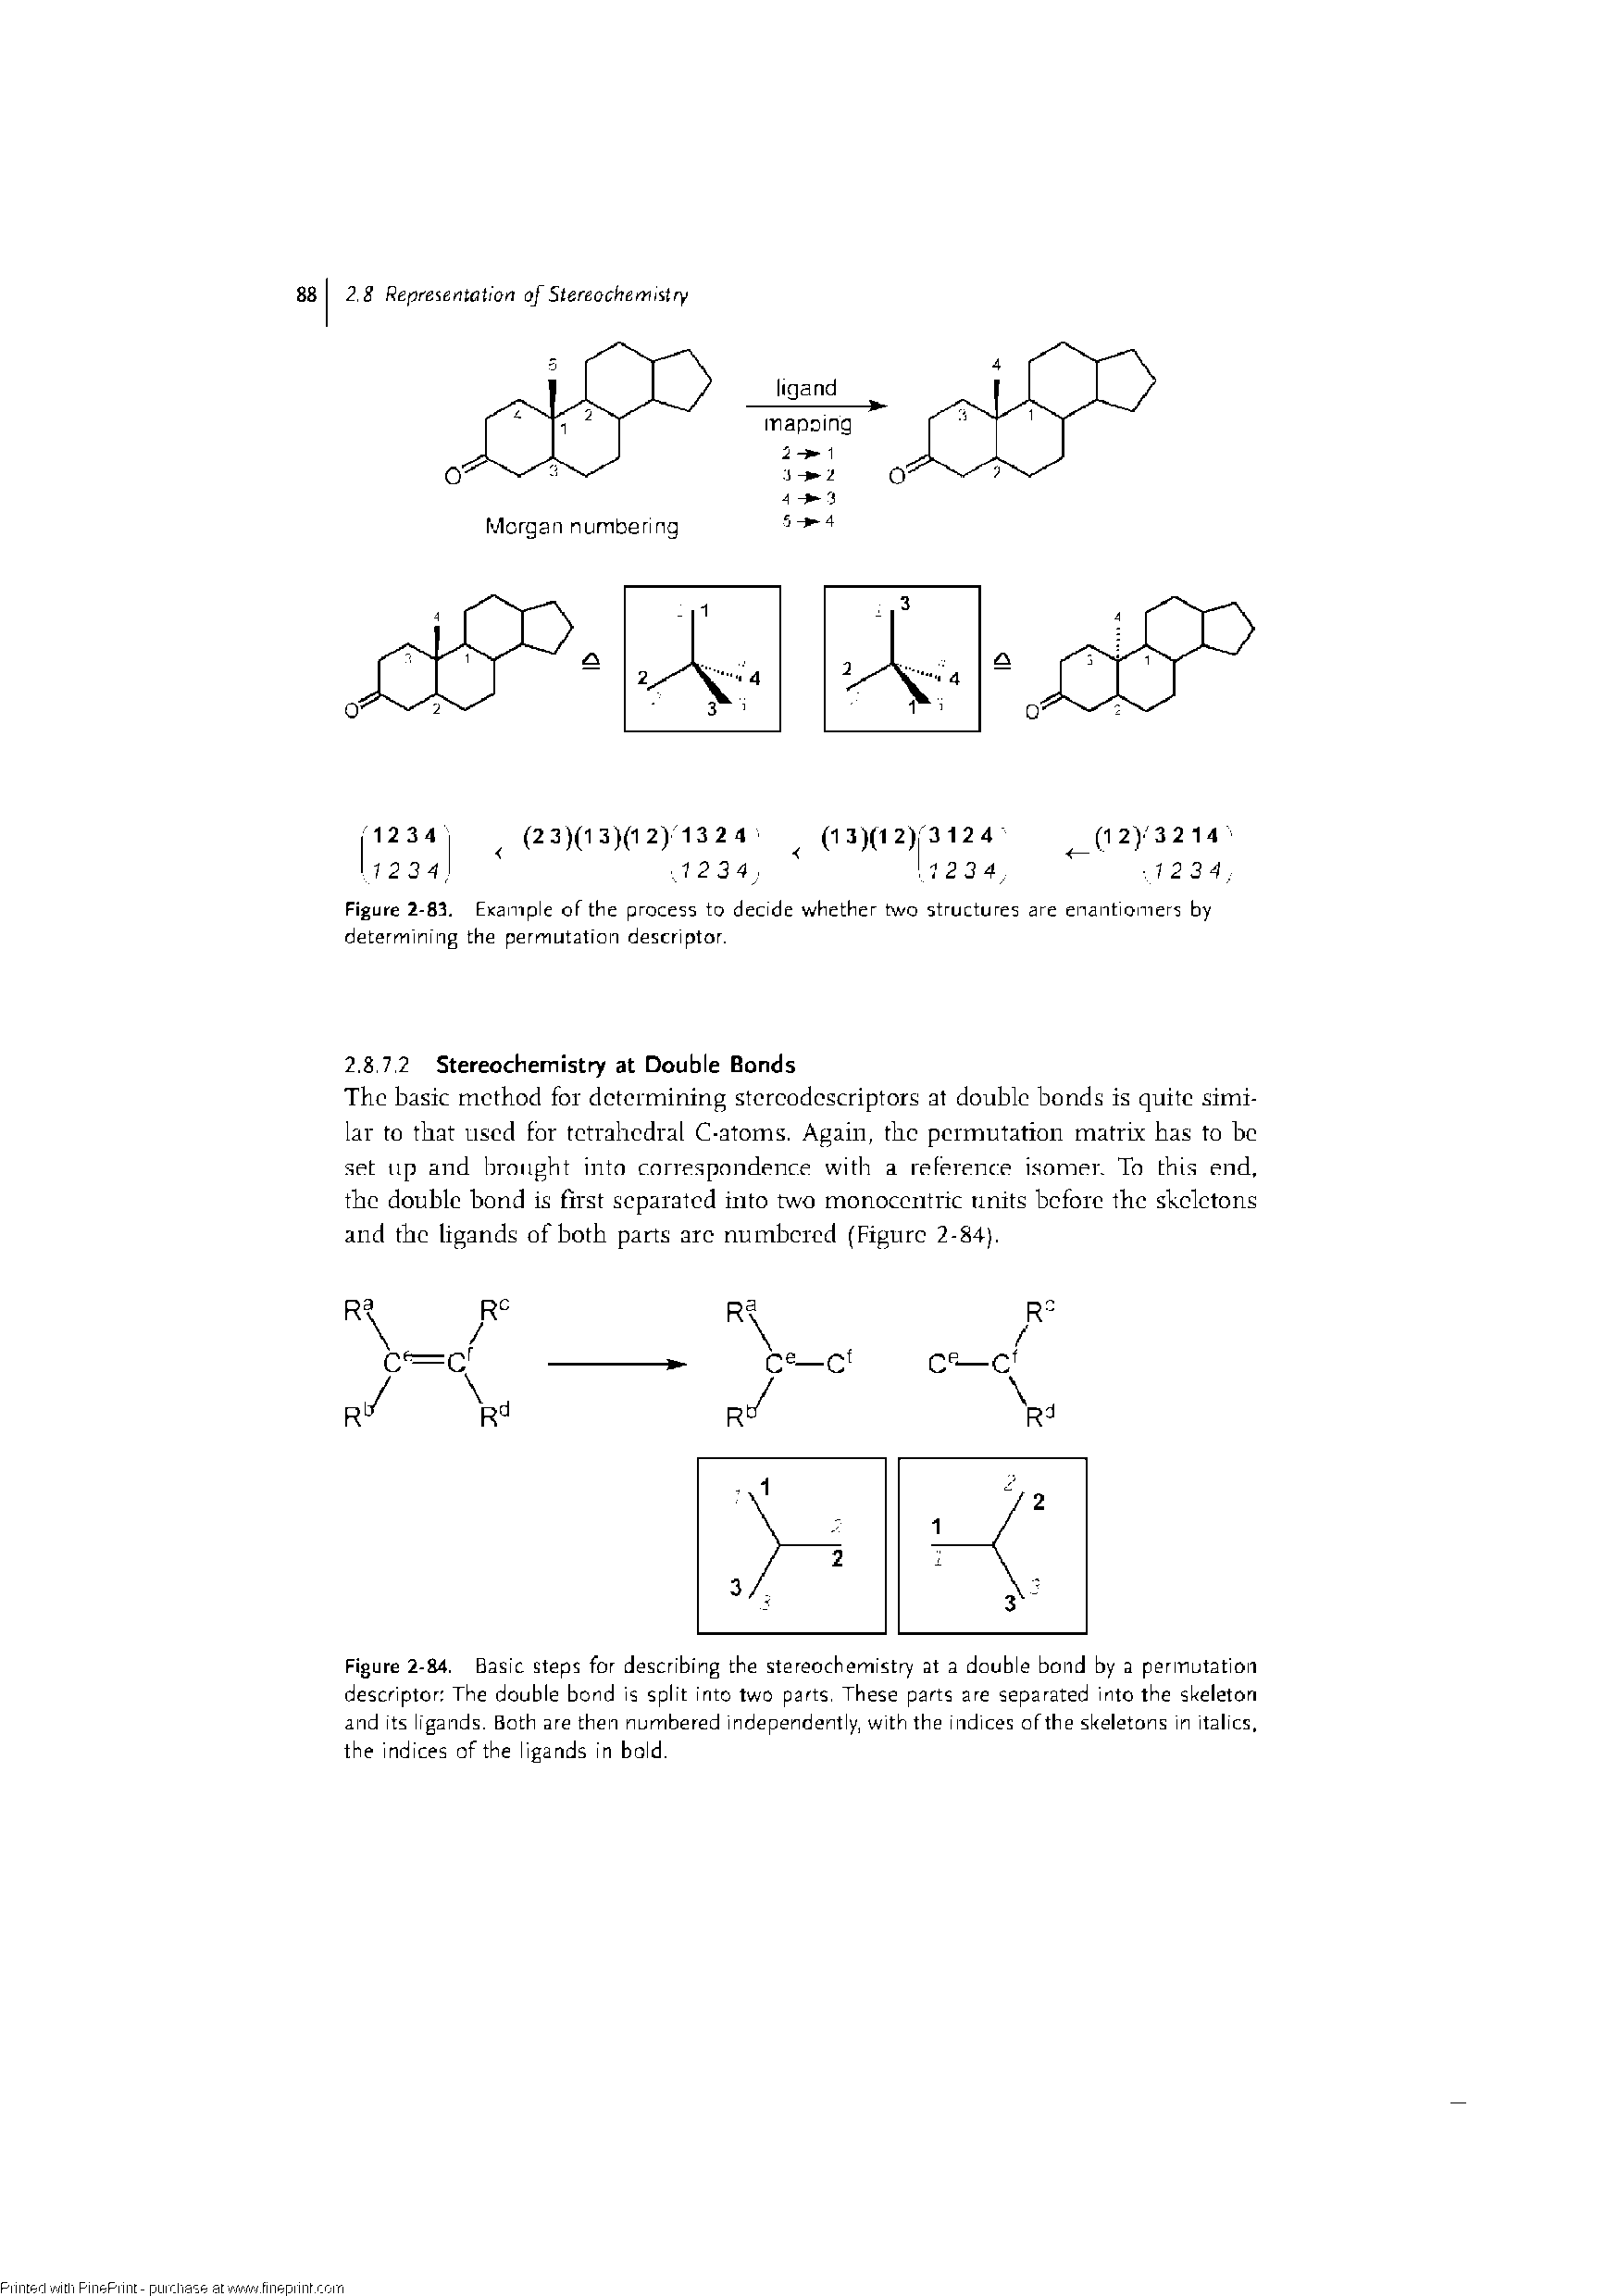 Figure 2-84. Basic steps for describing the stereochemistry at a double bond by a permutation descriptor The double bond is split into two parts, These parts are separated into the skeleton and its ligands. Both are then numbered independently, with the indices ofthe skeletons in italics, the indices ofthe ligands in bold.